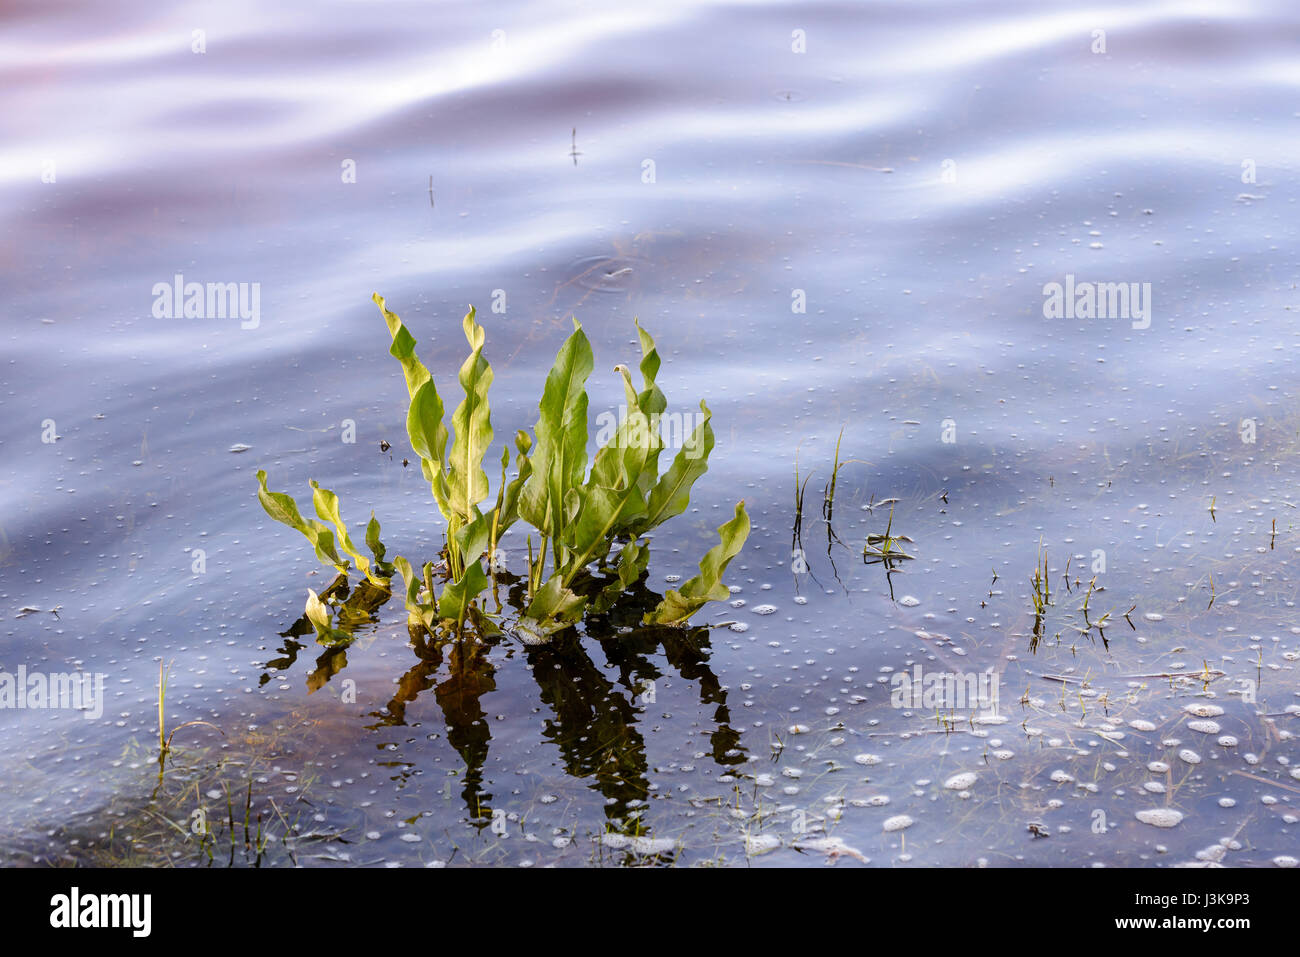 Young Rumex aquaticus L.,also known as Western dock, in the Dnieper river in Kiev, Ukraine Stock Photo